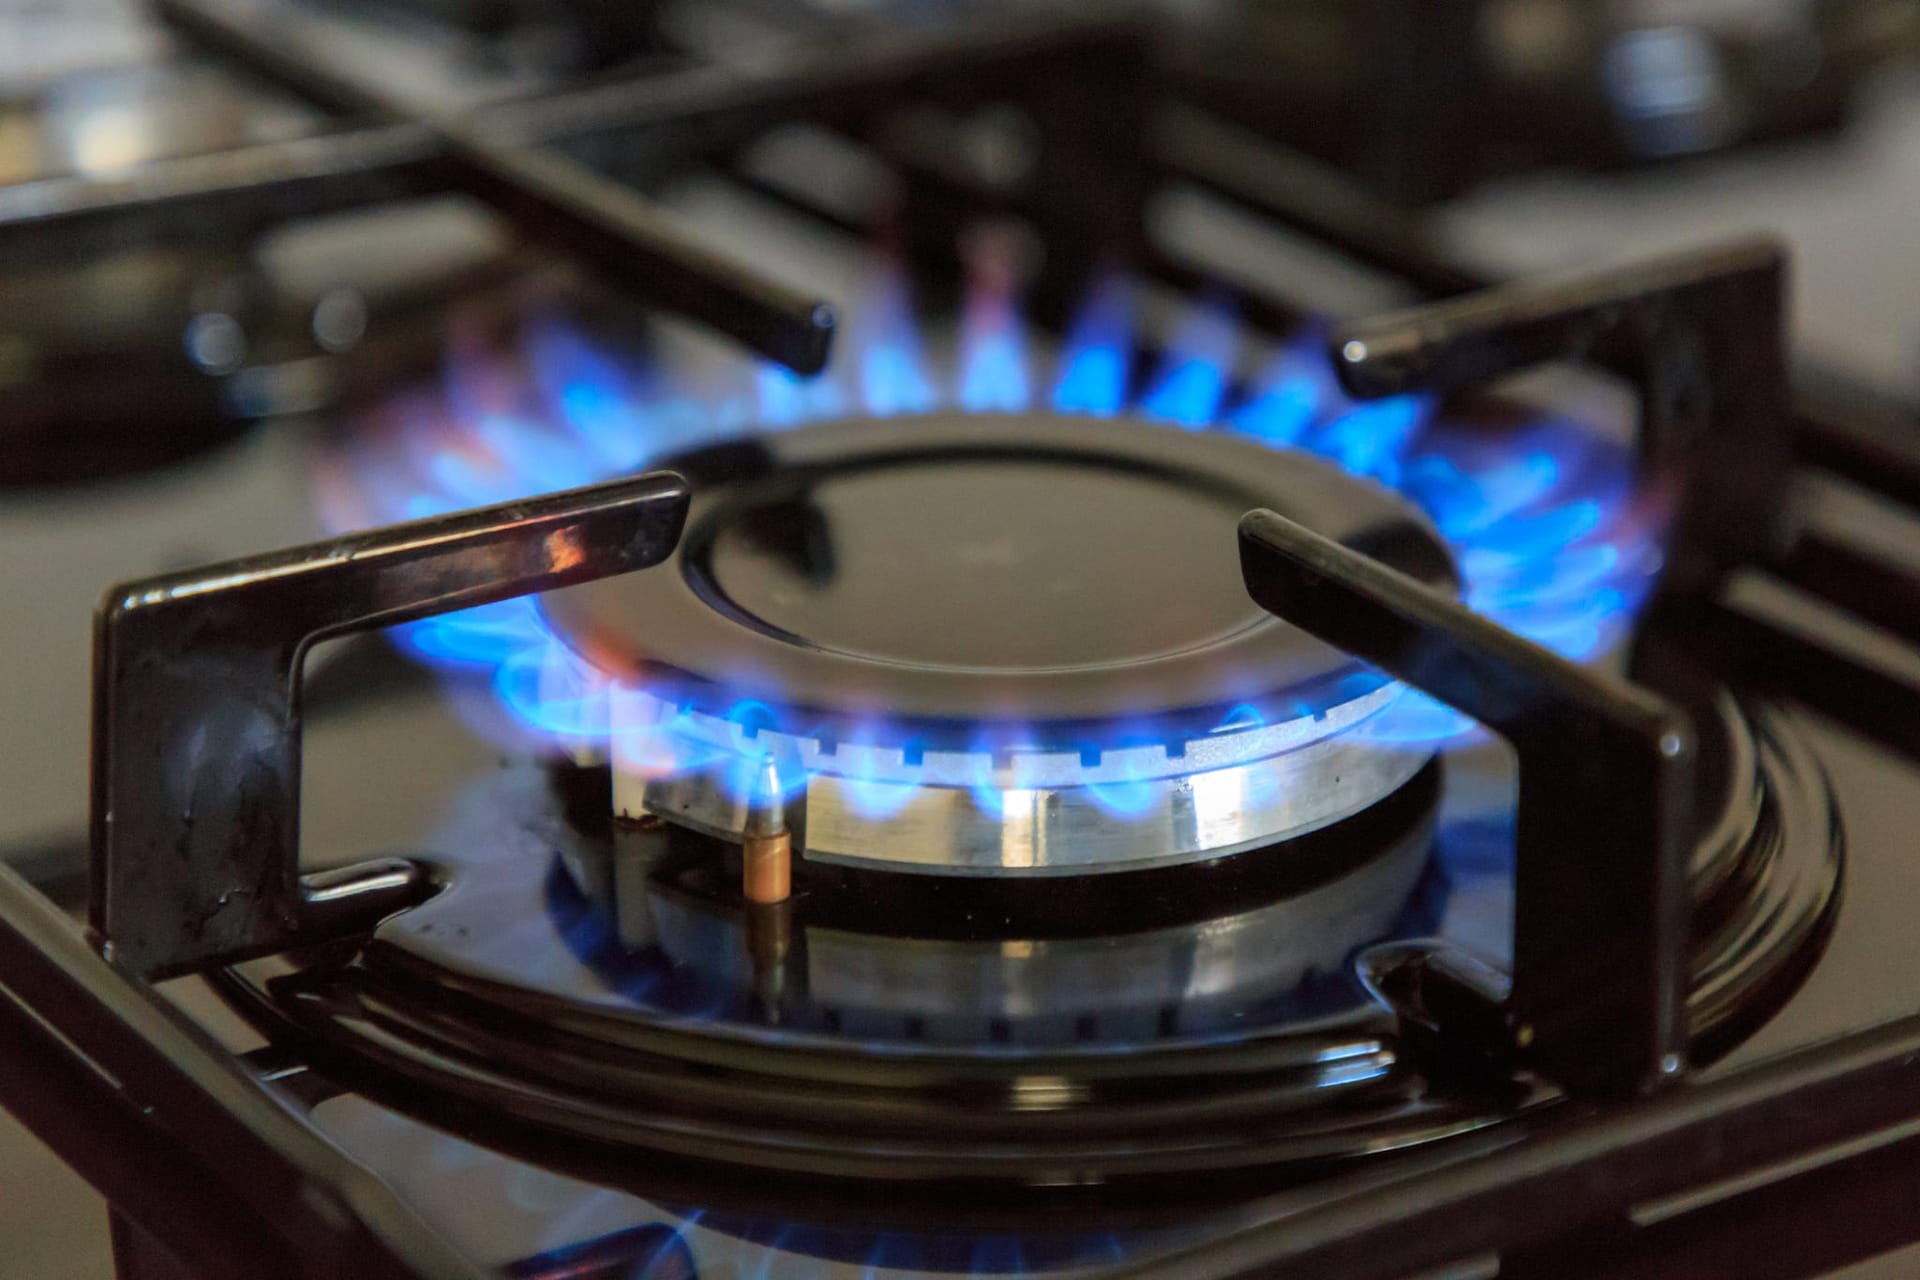 Gas Stove Clicking But Not Lighting: 7 Easy Ways To Fix It